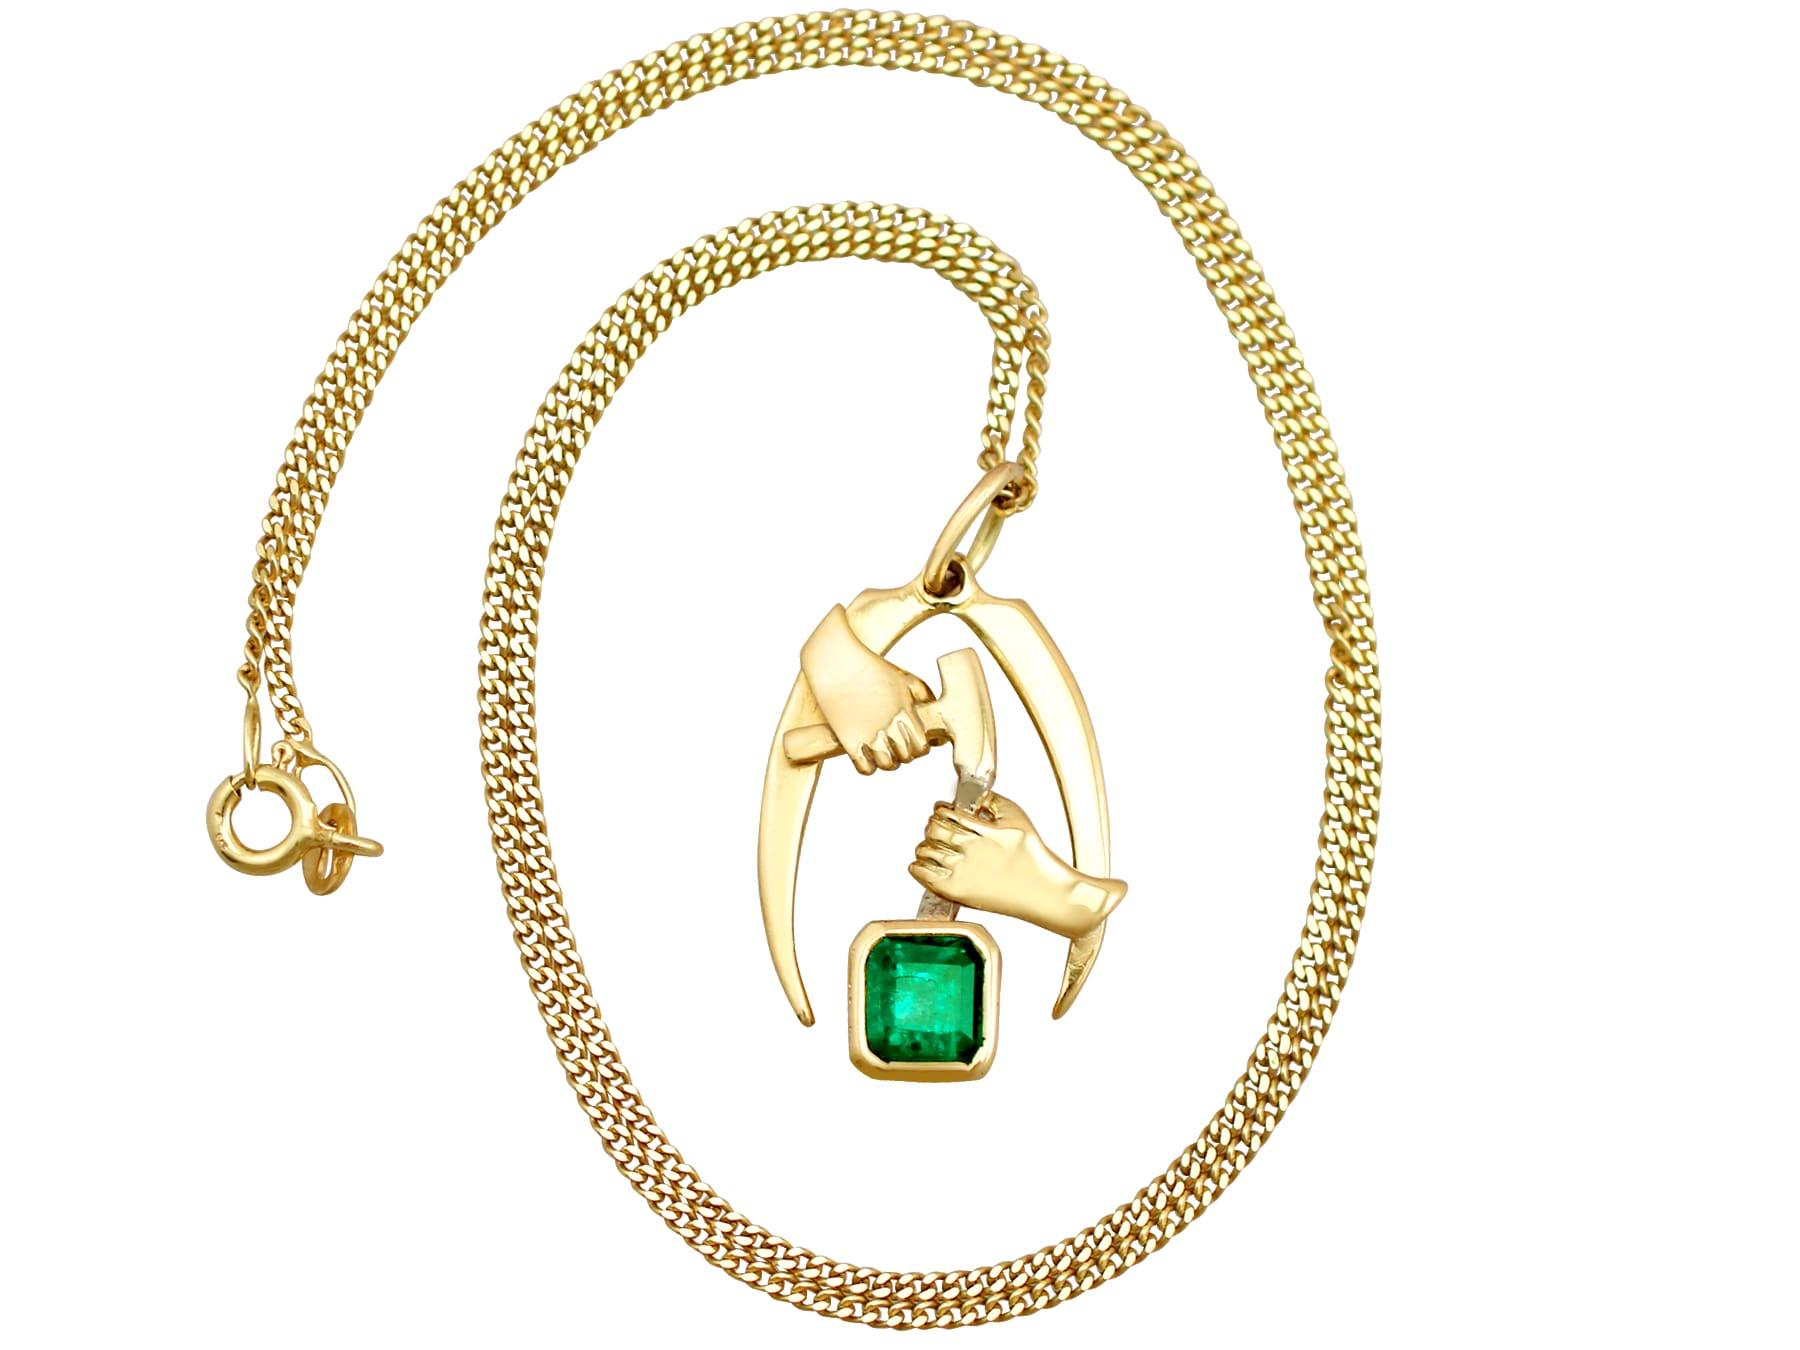 A fine and impressive vintage 1.07 carat natural emerald, 18 karat yellow gold 'artisan' pendant; part of our diverse vintage jewelry collection.

This unique necklace has been crafted in 18k yellow gold.

The unusual pendant depicts two hands